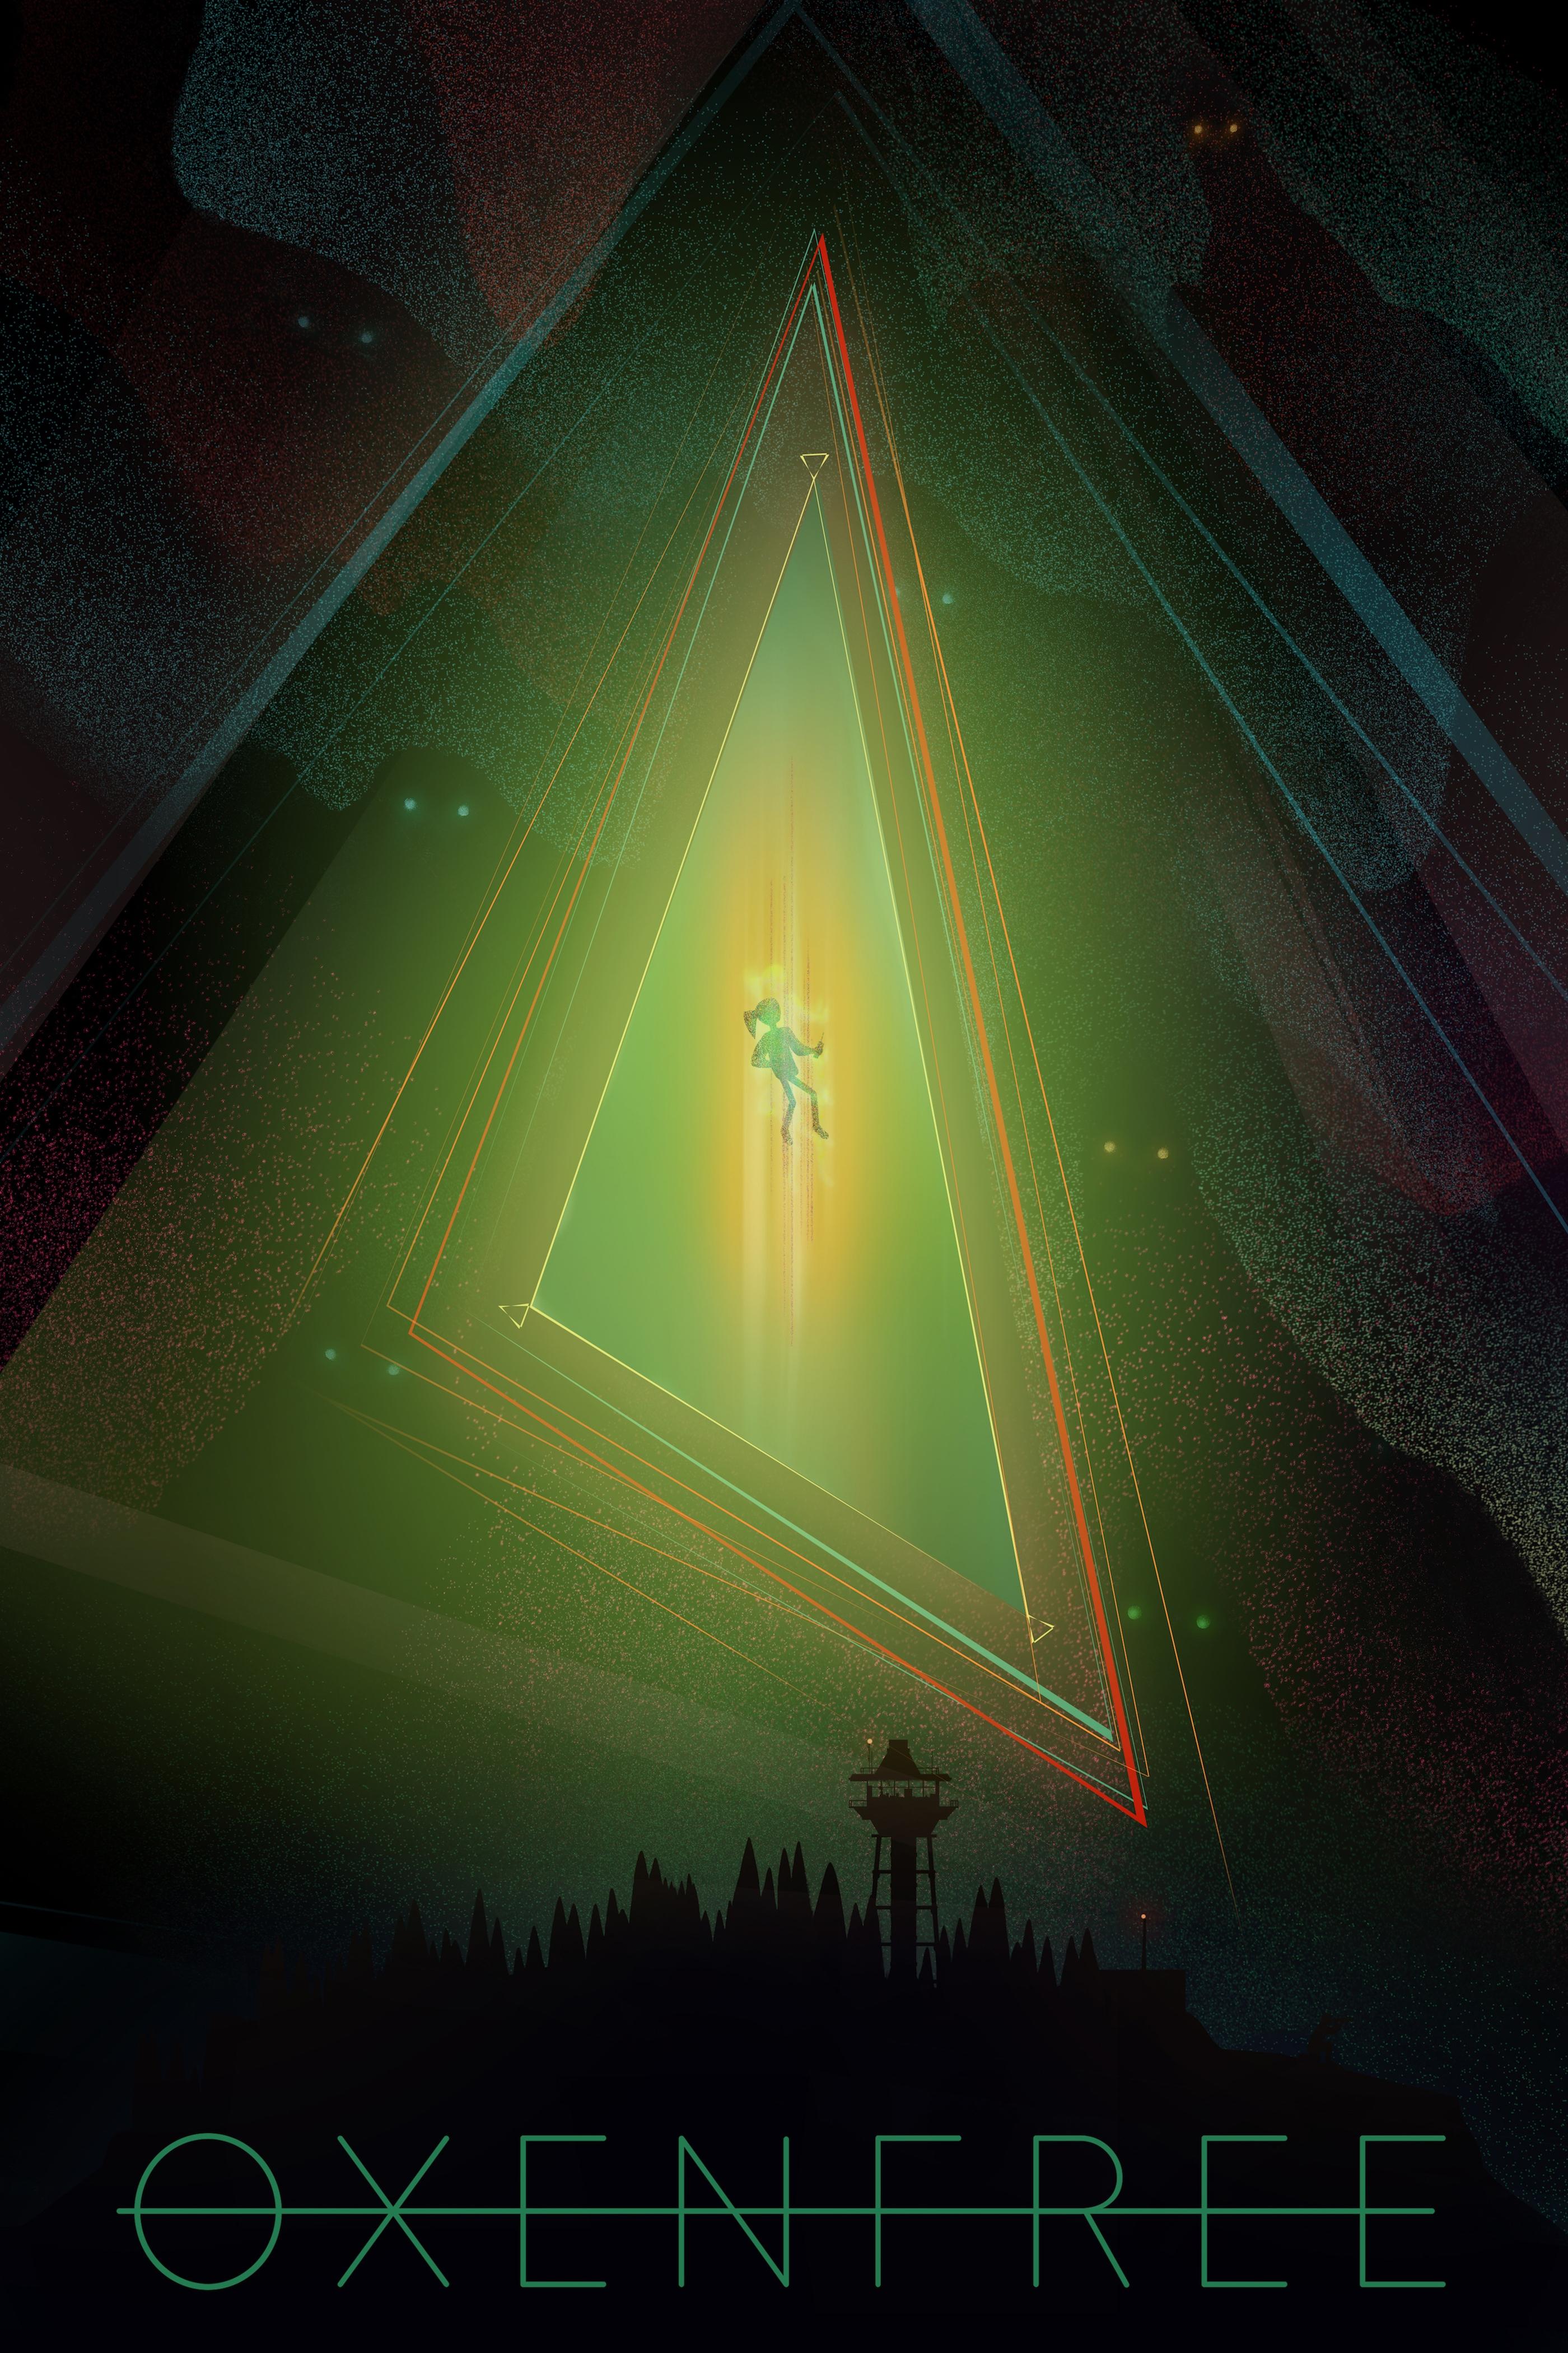 olly olly oxenfree game high res